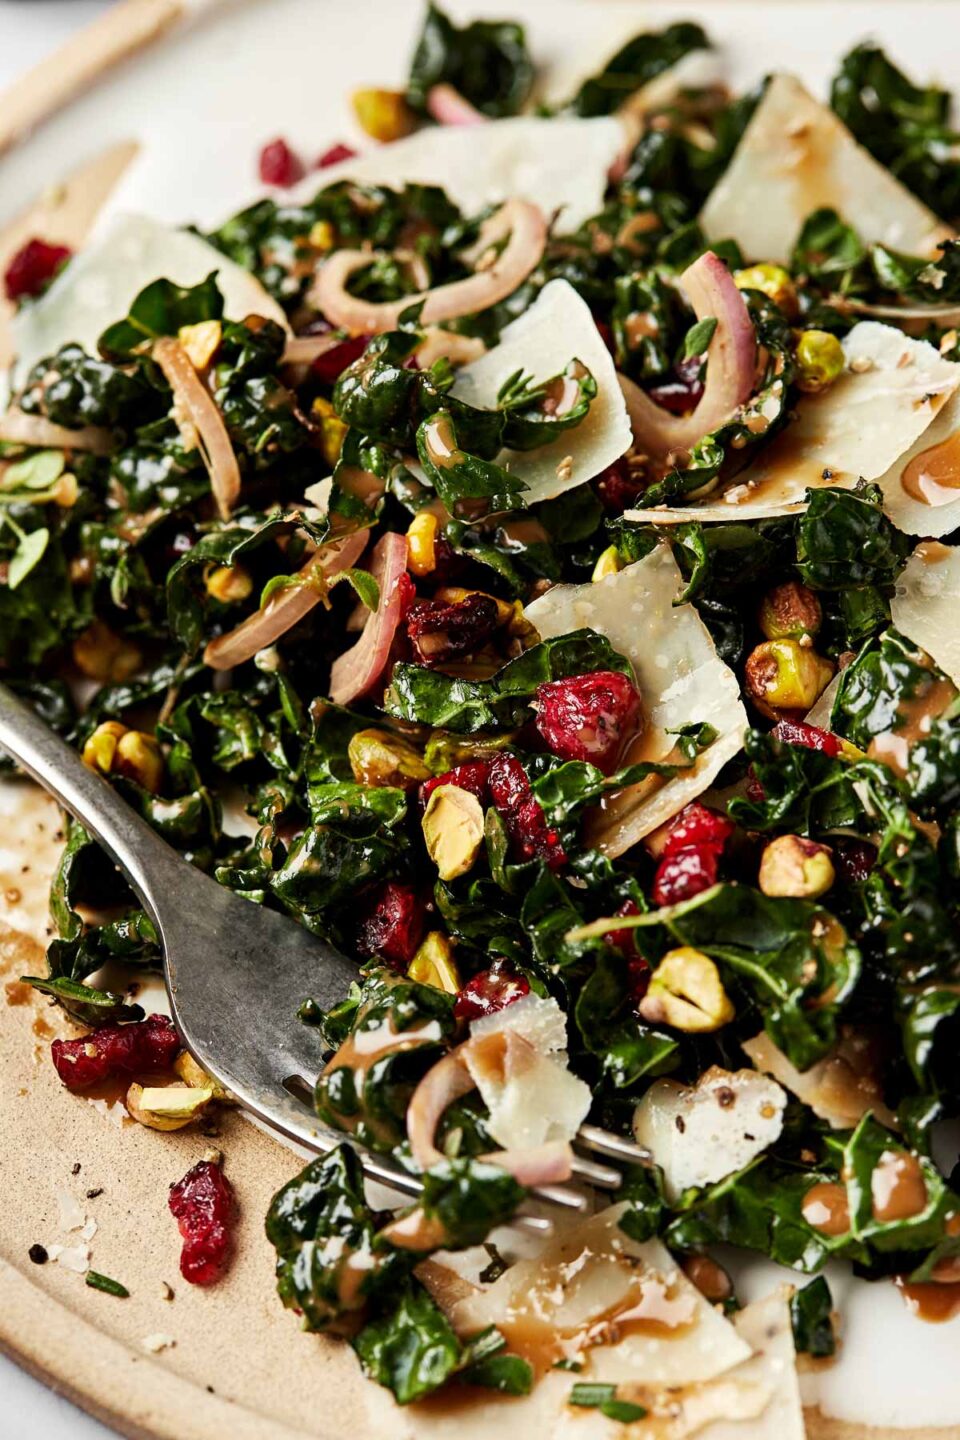 A closeup shot of a kale salad with cranberries, pistachios and parmesan on a beige plate with a silver fork.